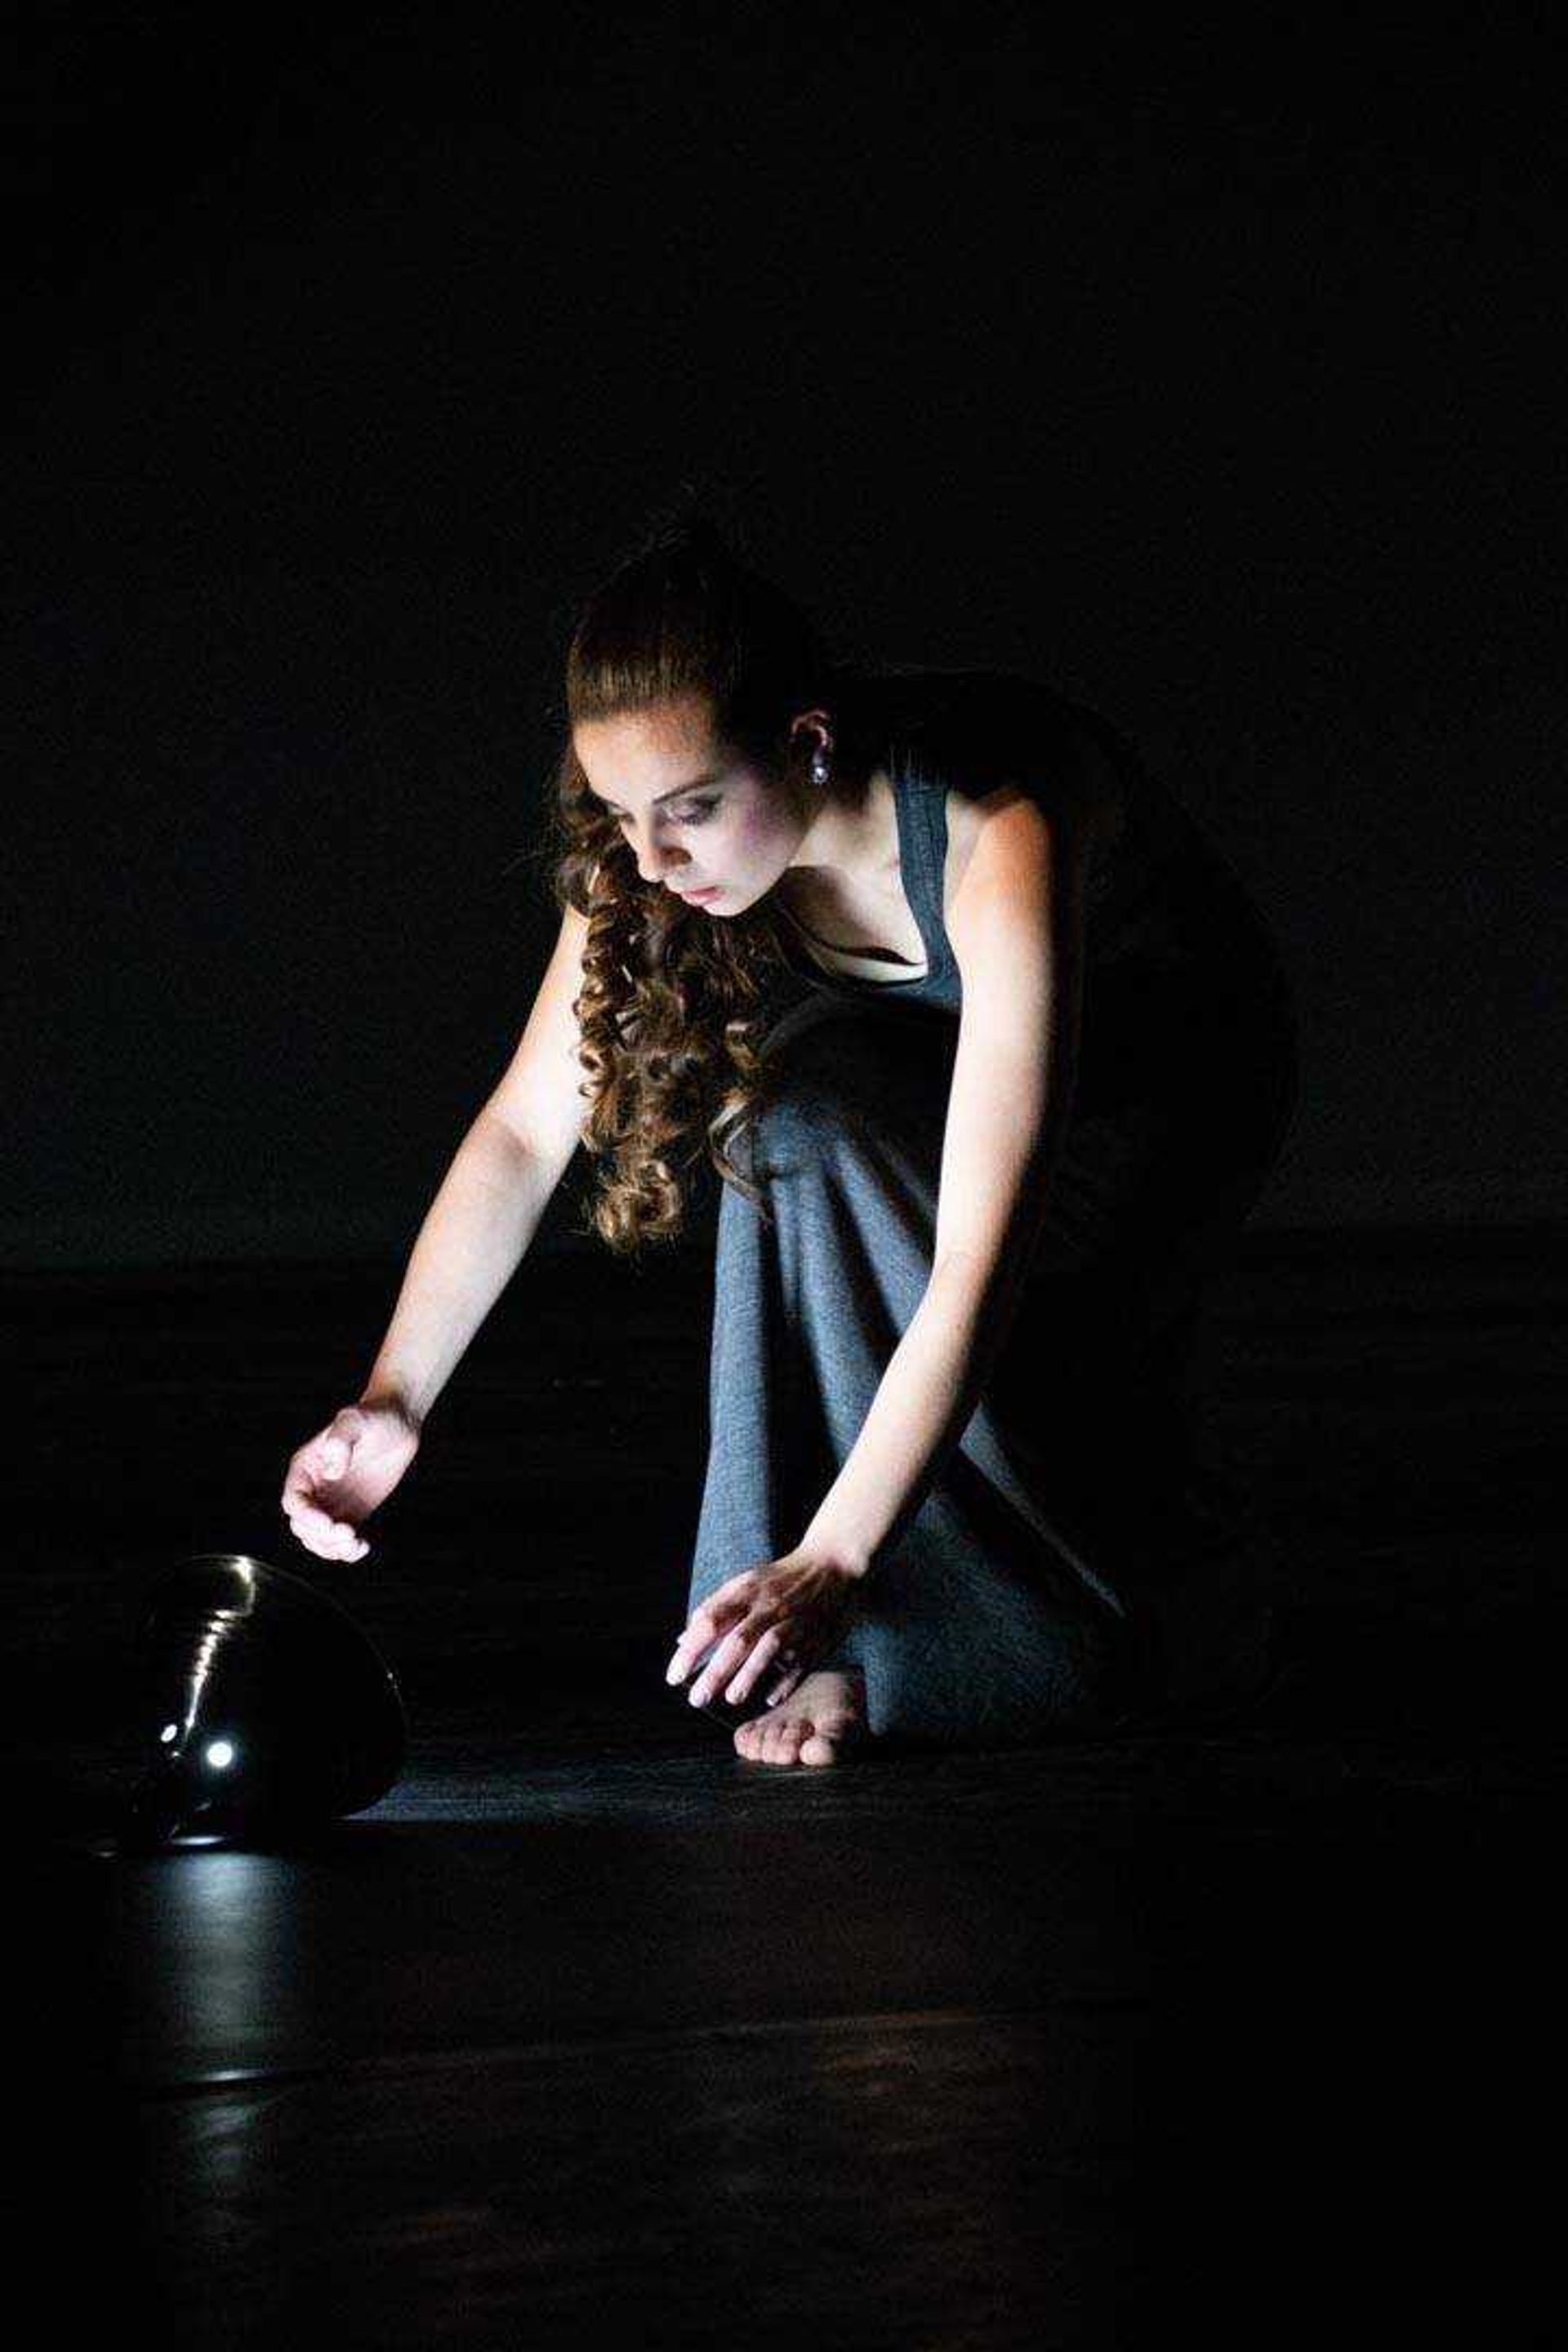 Senior Emilia Schempp works with her prop, a lamp, in "Silent Language," choreographed by guest artist Jennifer Mabus, during a Spring into Dance dress rehearsal.